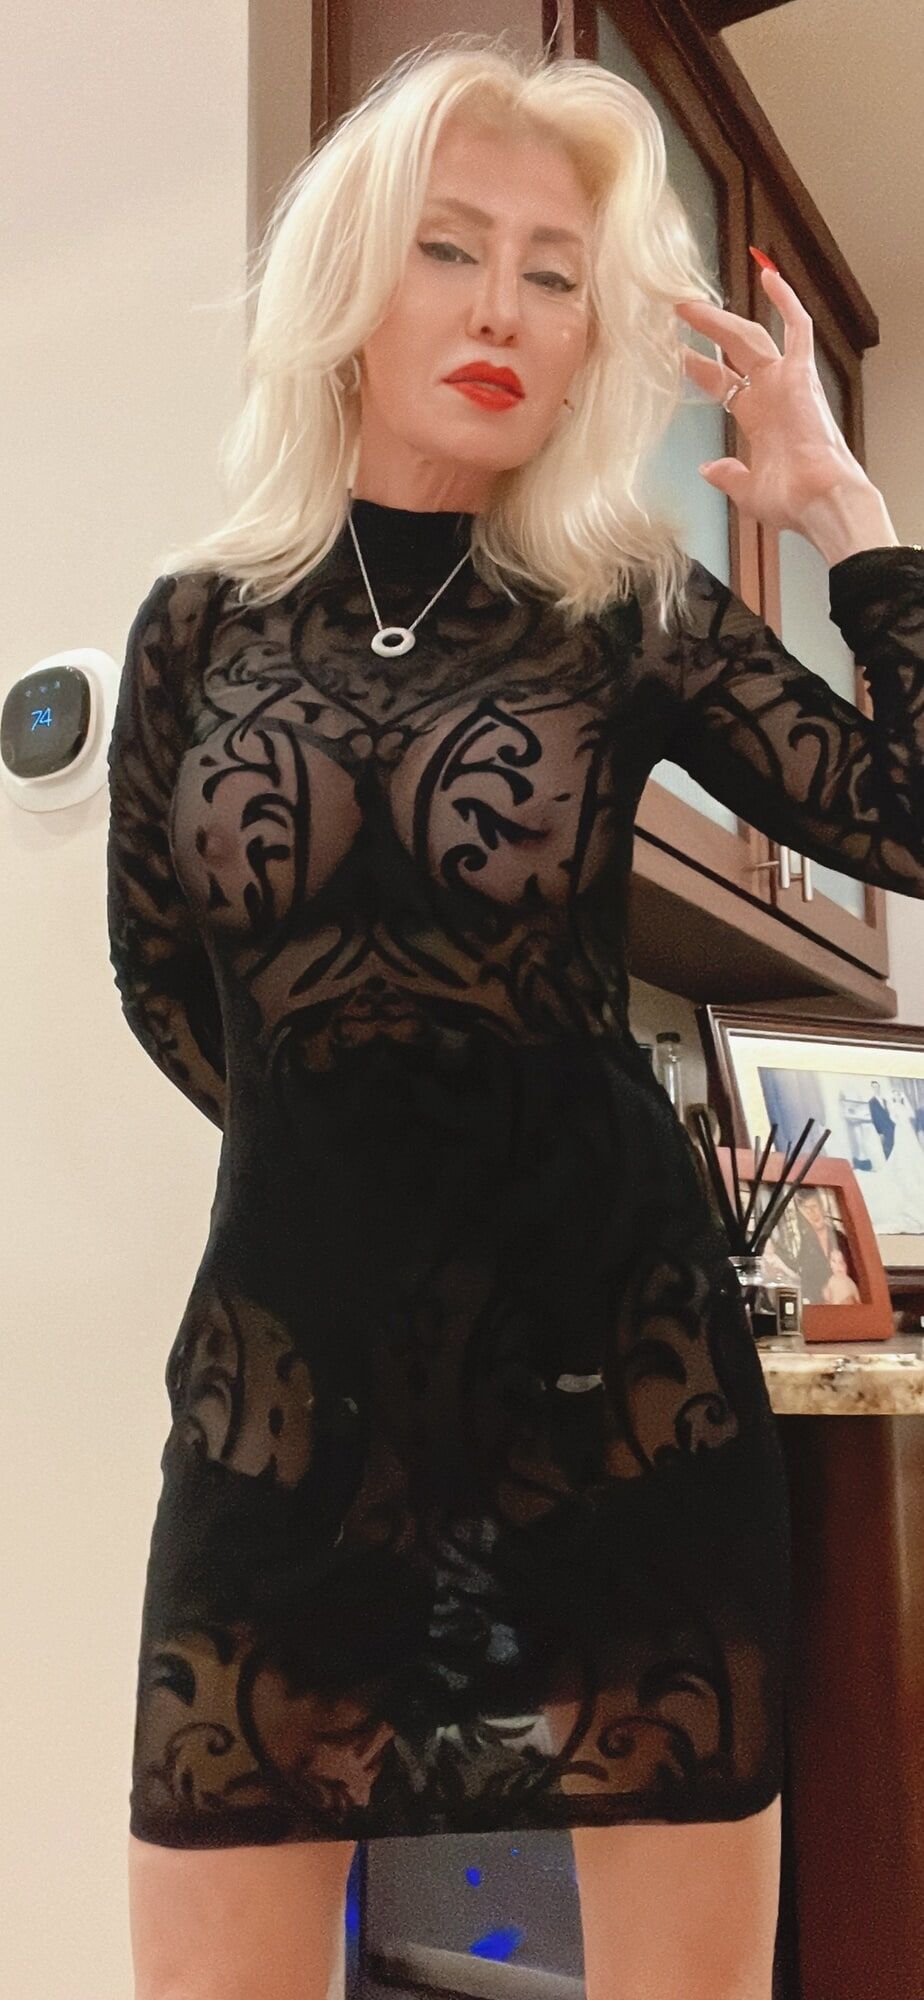 Going out in a sheer dress again  #6